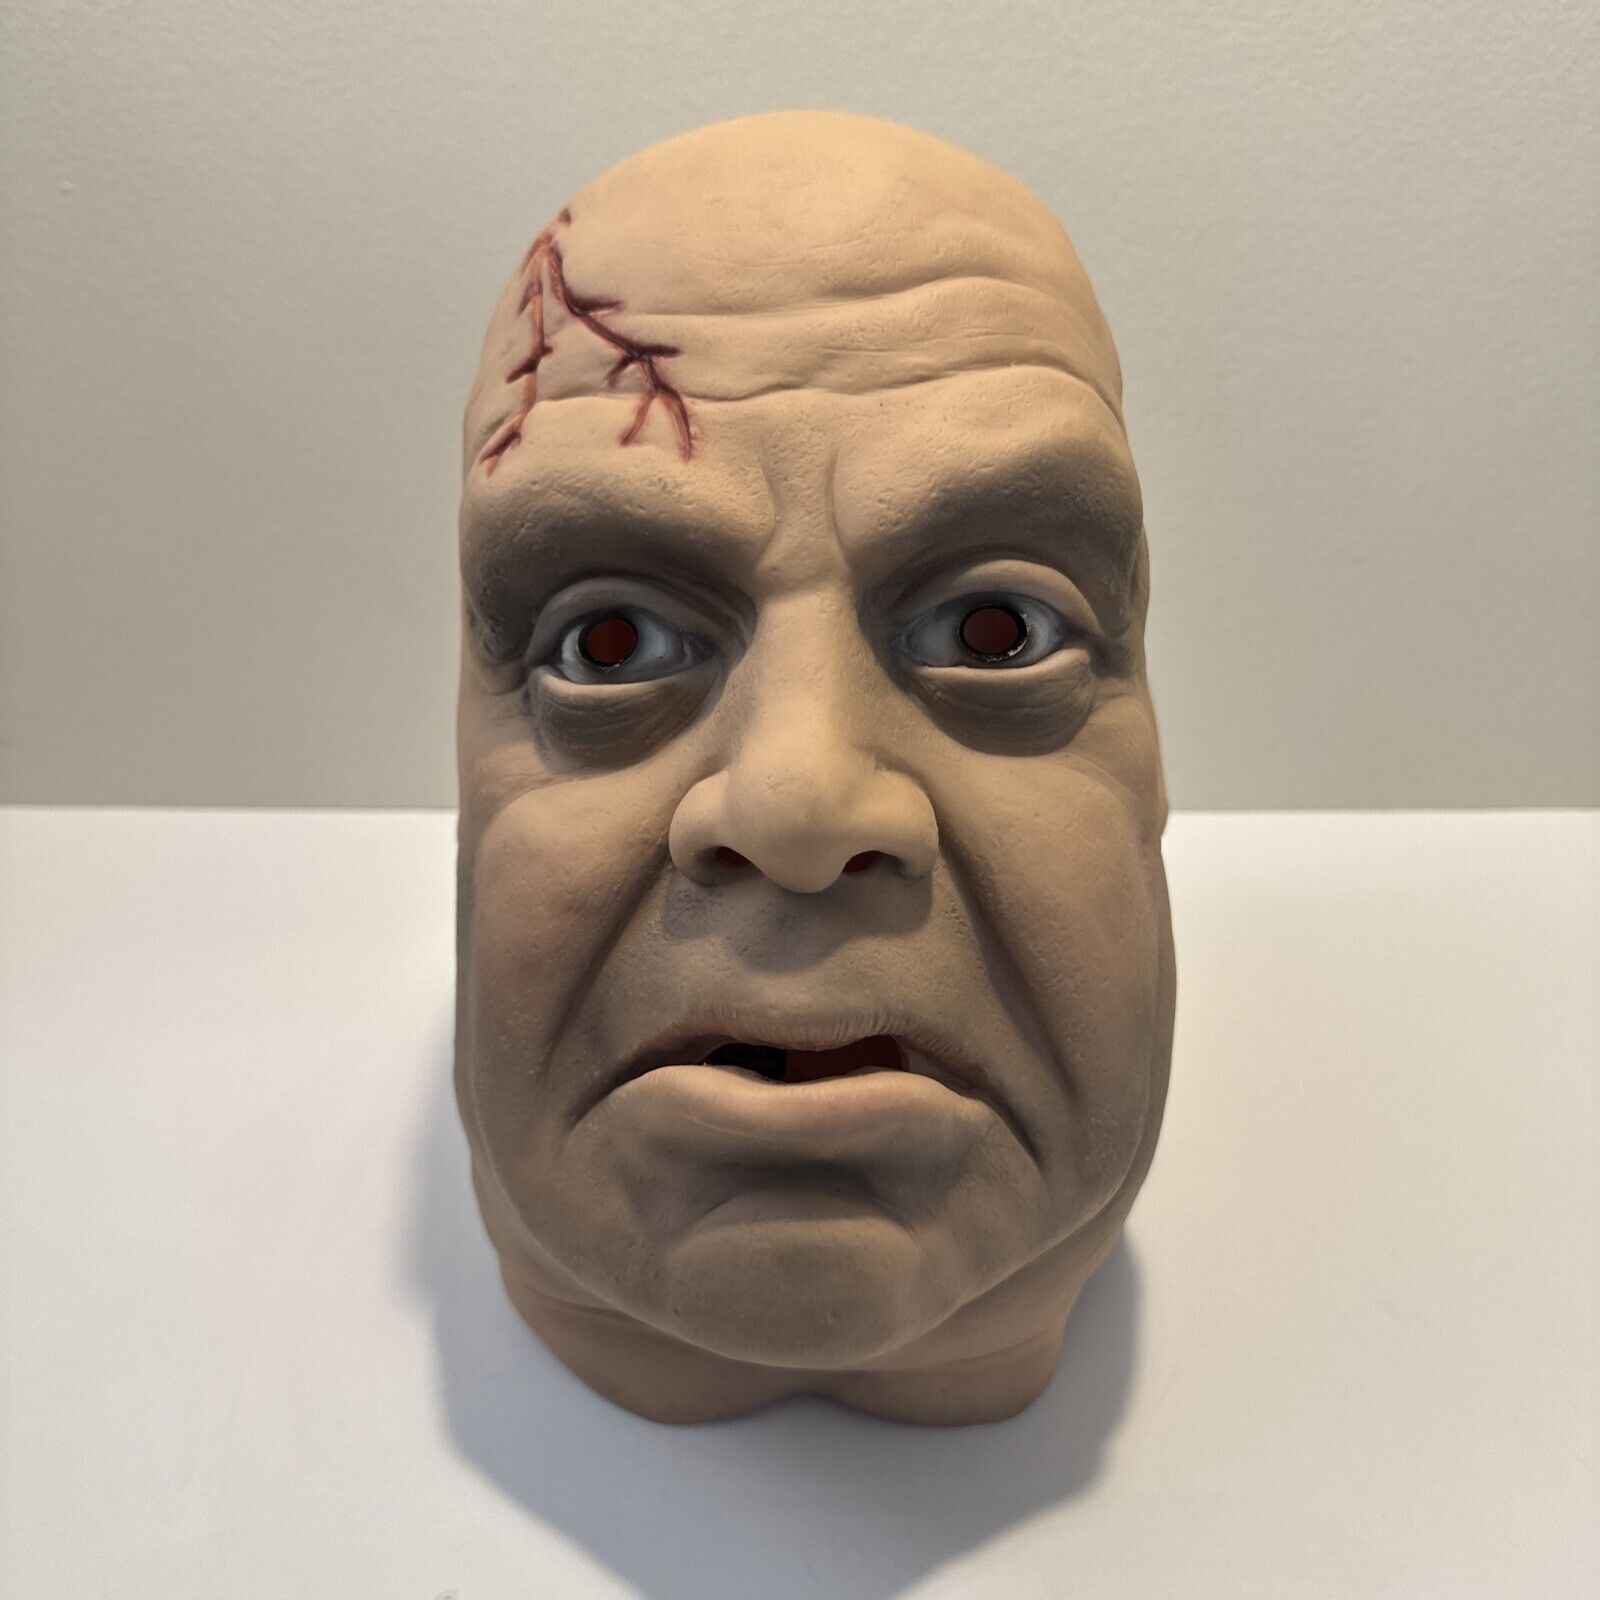 Vintage Don Post 1977 Rubber Halloween Mask PLAN 9 FROM OUTER SPACE Tor Johnson